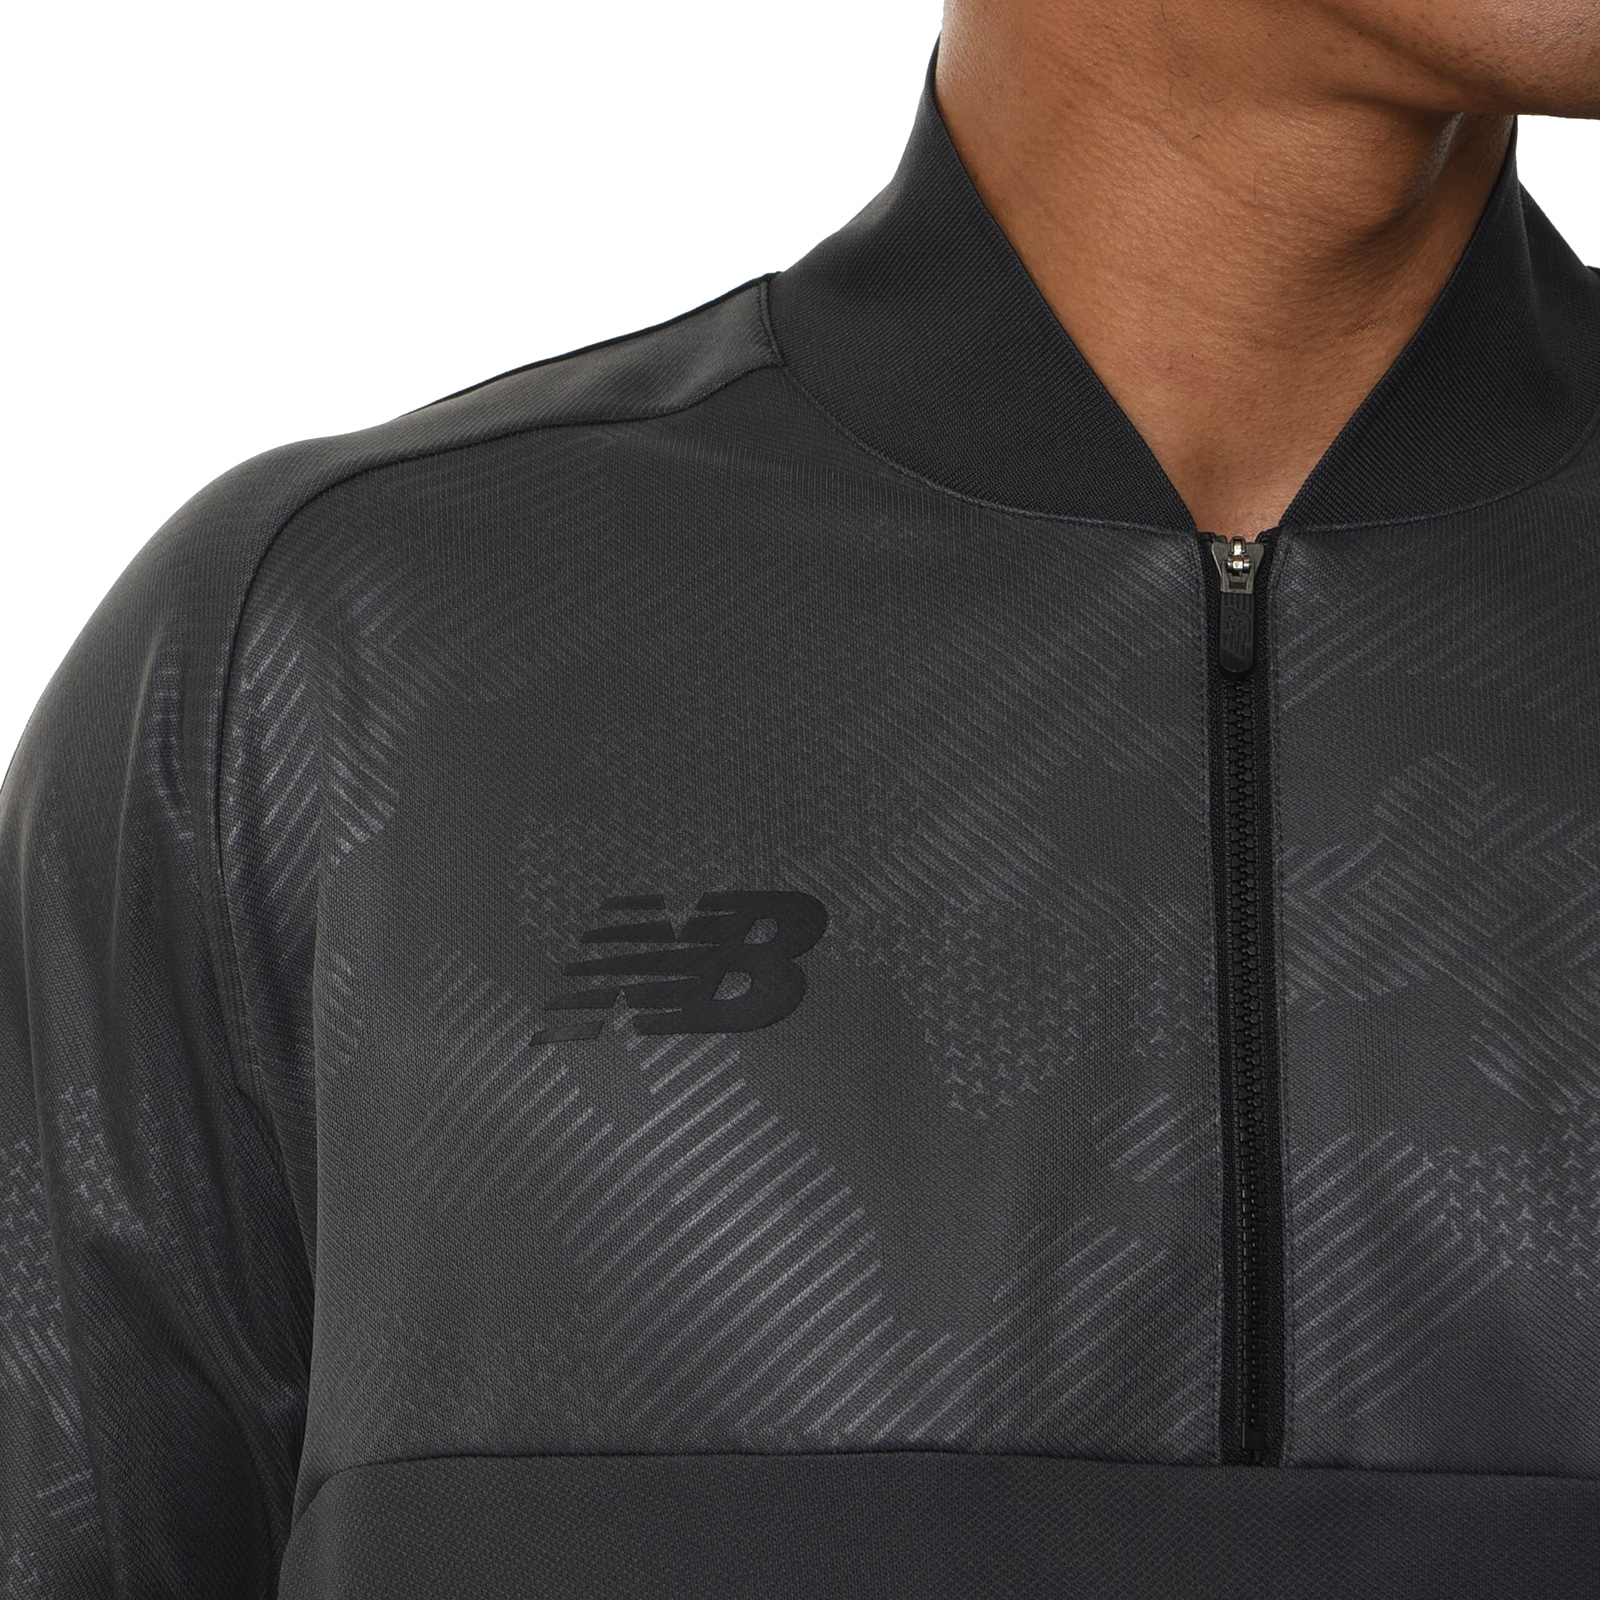 Black Out Collection Half Zip Jersey Top